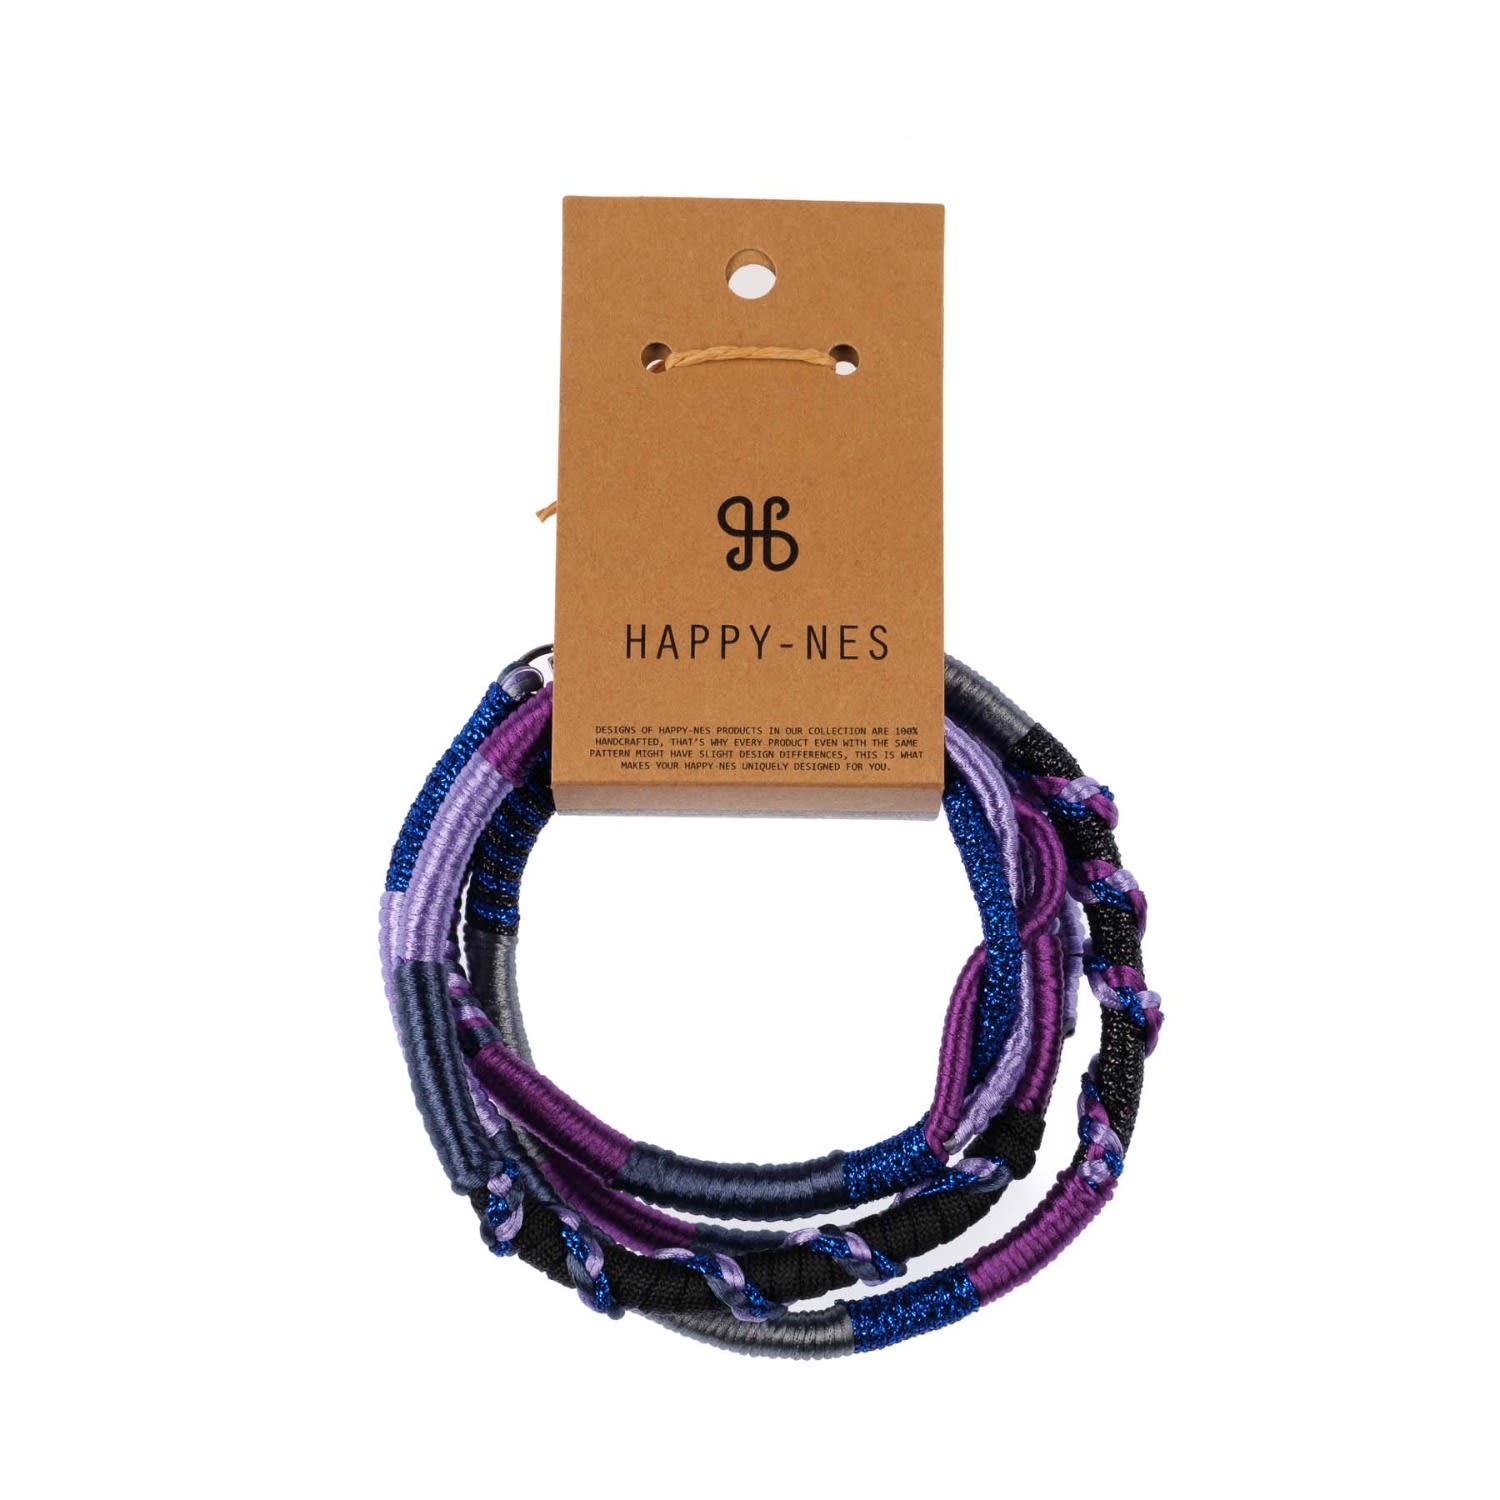 Happy-nes Midnight Trendy Phone Strap For Iphone In Purple